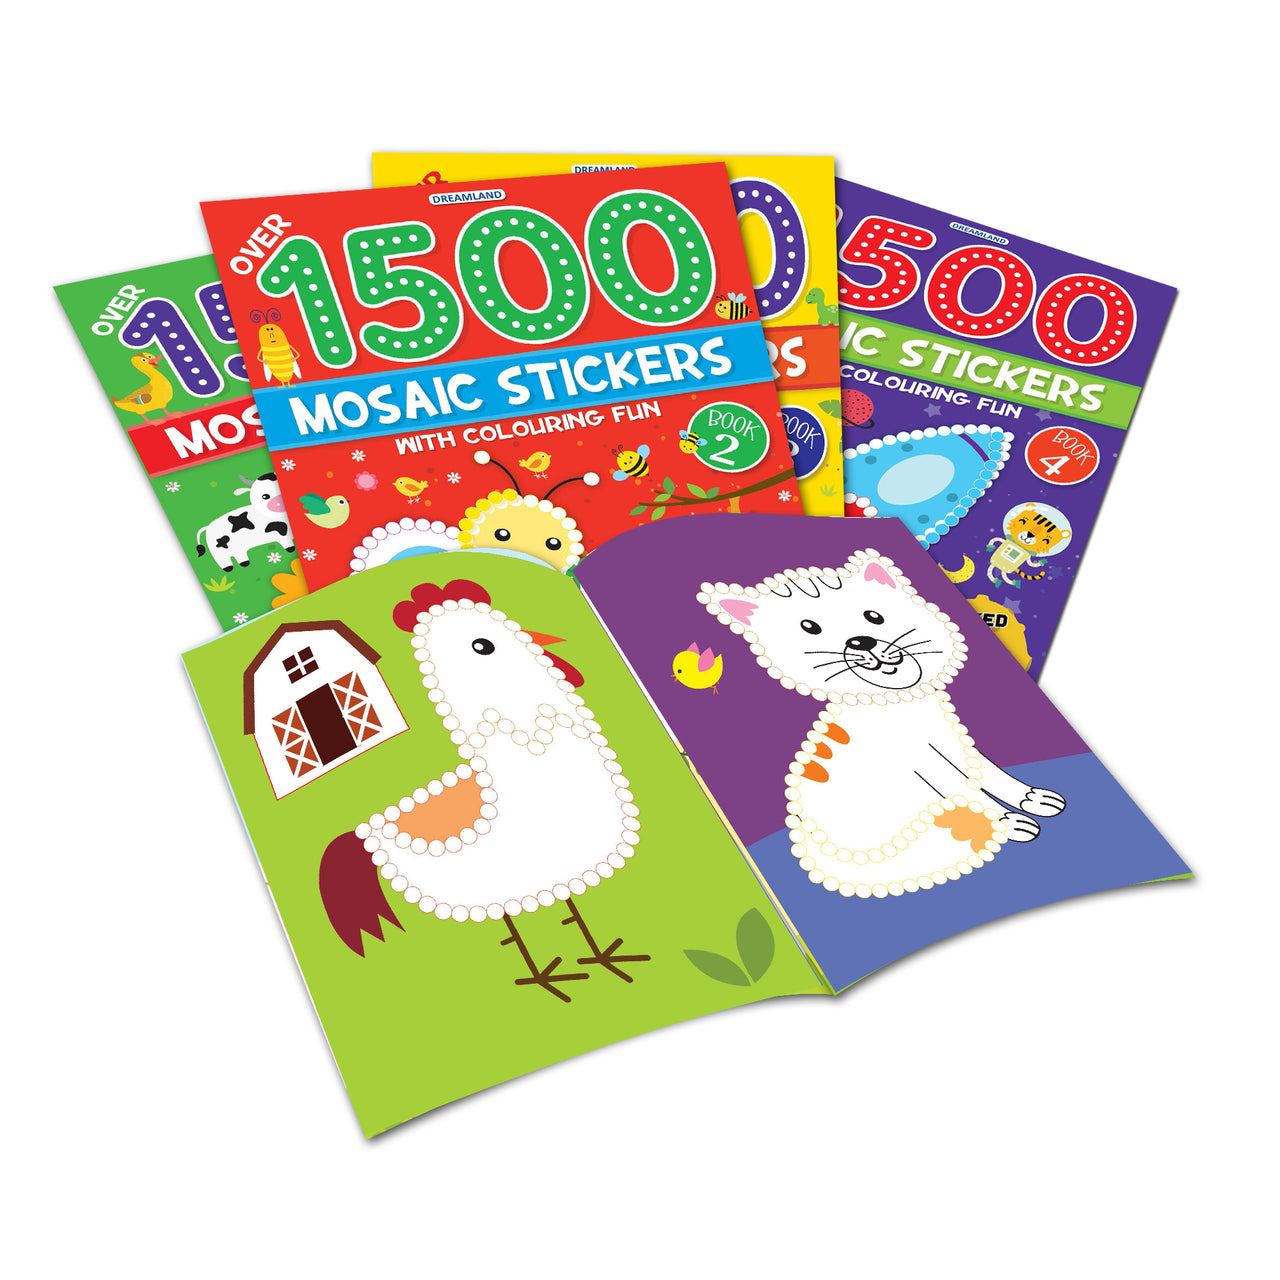 Dreamland Publications 1500 Mosaic Stickers Book 2 with Colouring Fun - Sticker Book for Kids Age 4 - 8 years - Distacart